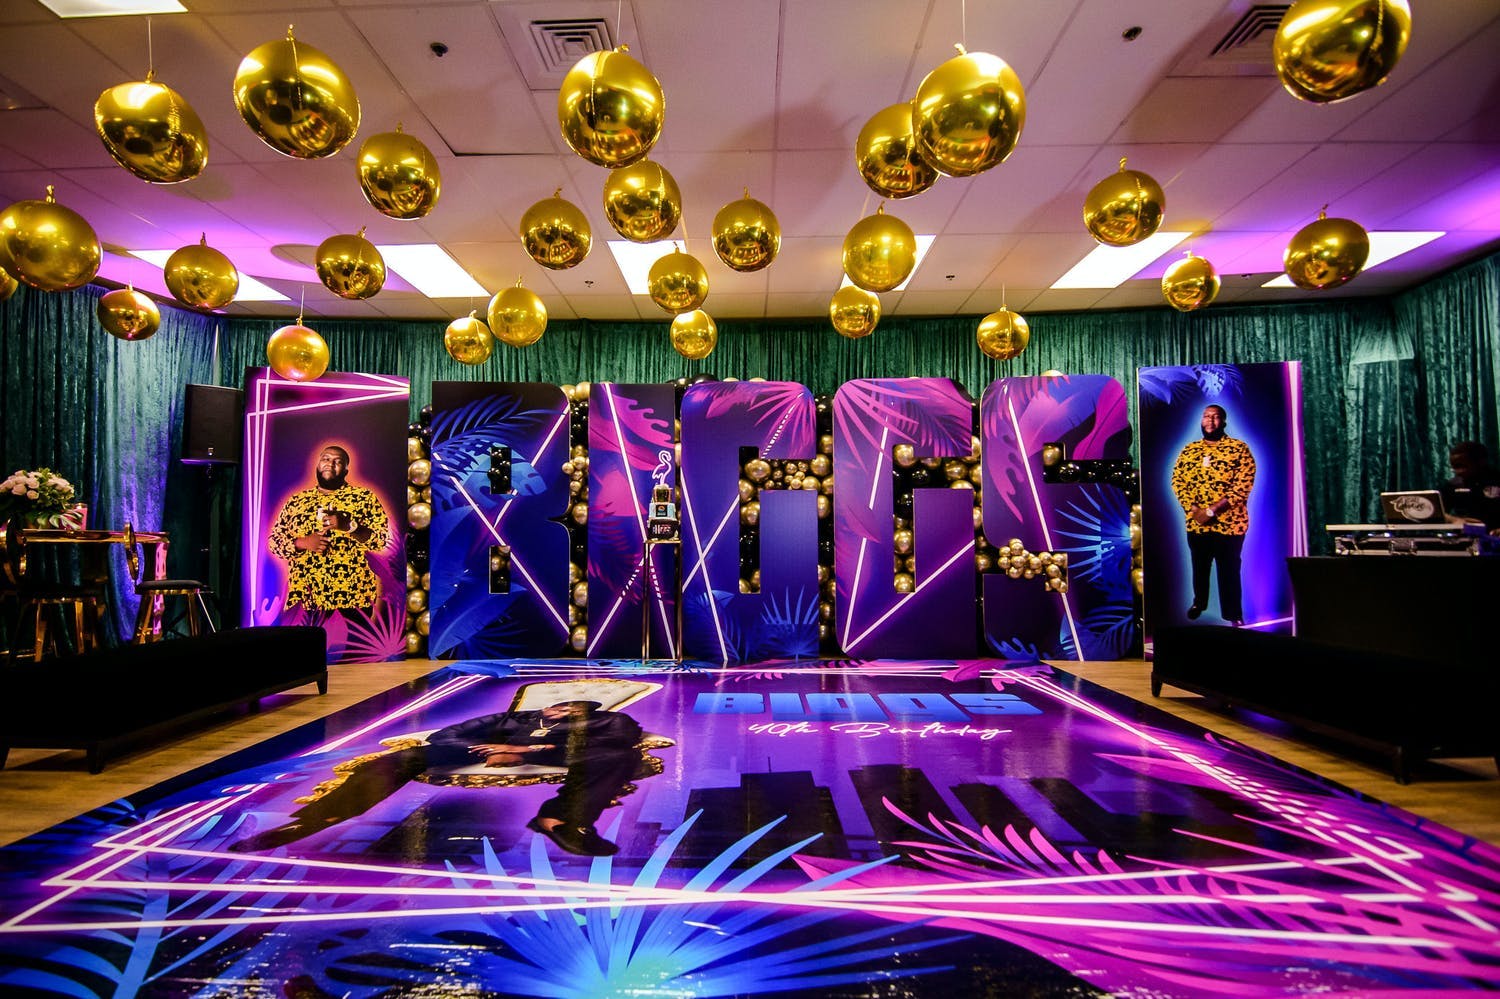 Milestone Birthday Celebration with Gold Disco Balls and Purple and Blue Dance Floor with Lasers | PartySlate